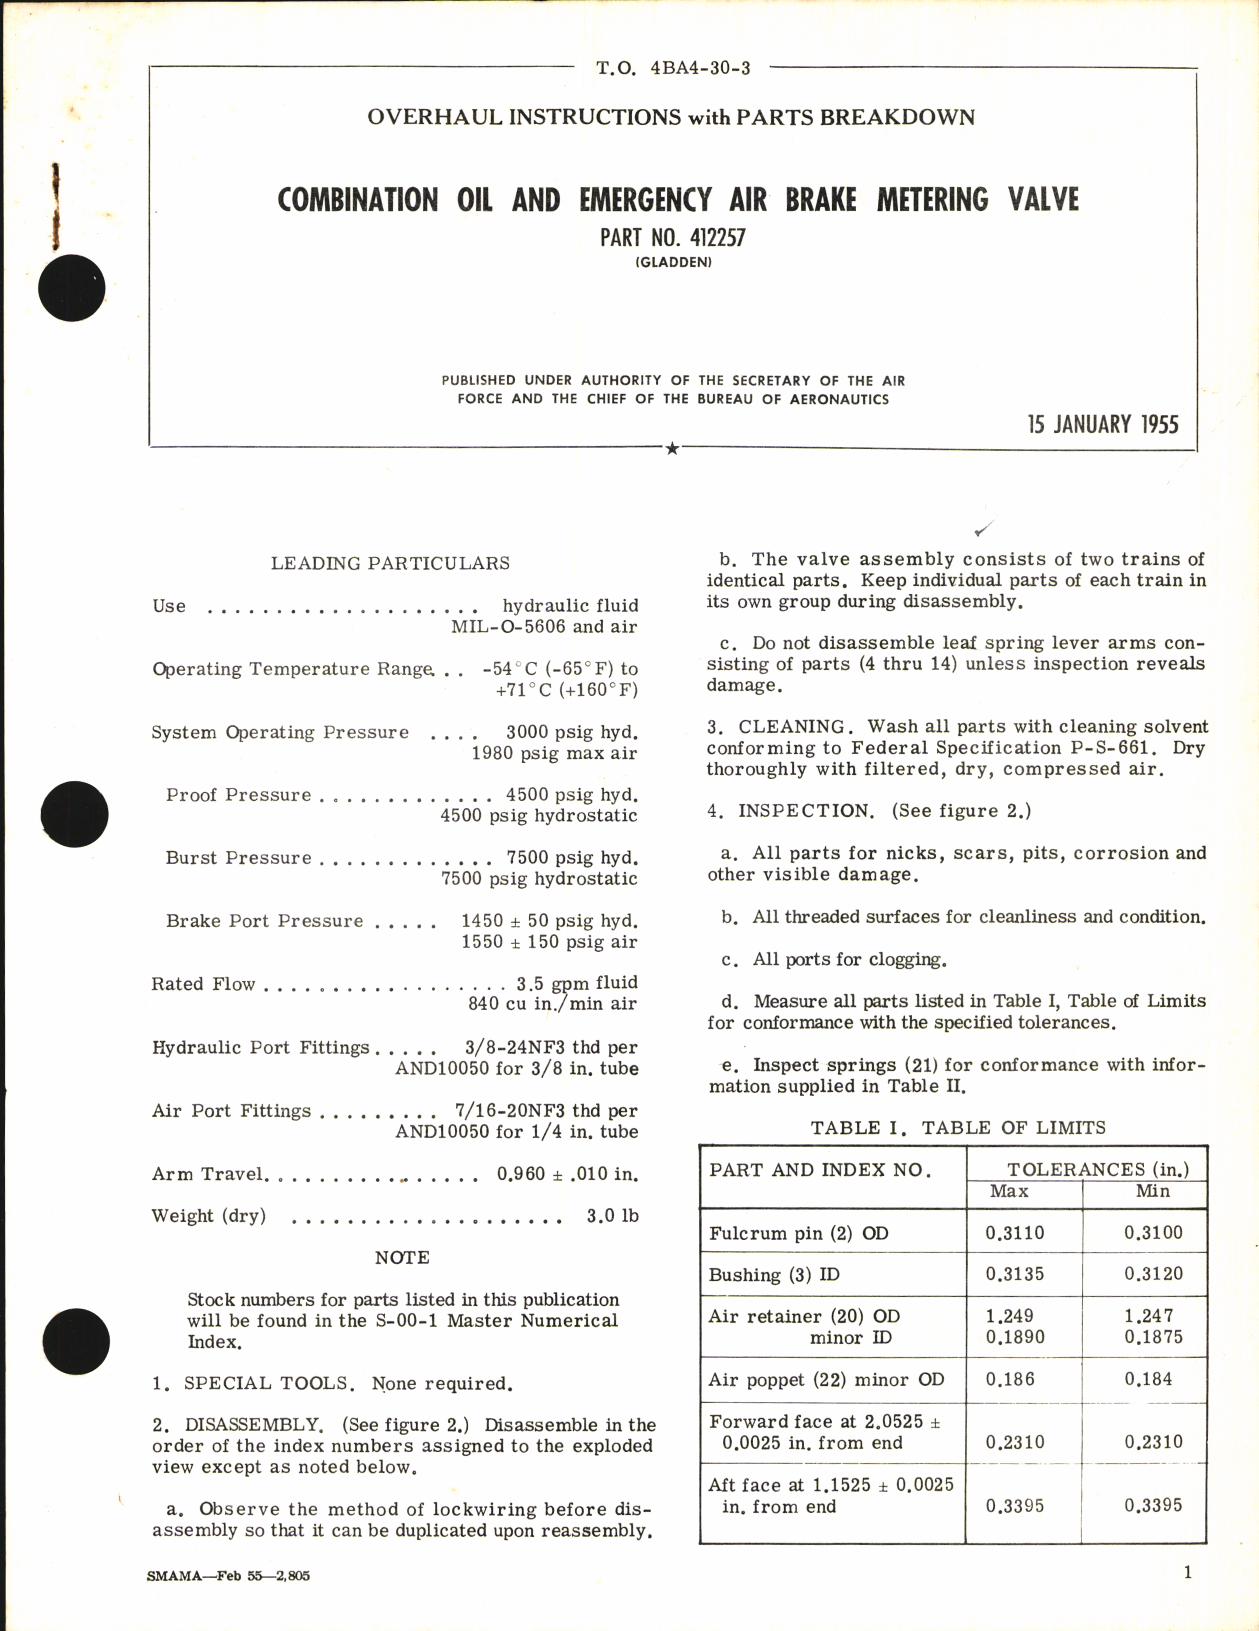 Sample page 1 from AirCorps Library document: Overhaul Instructions with Parts Breakdown for Combination Oil and Emergency Air Brake Metering Valve